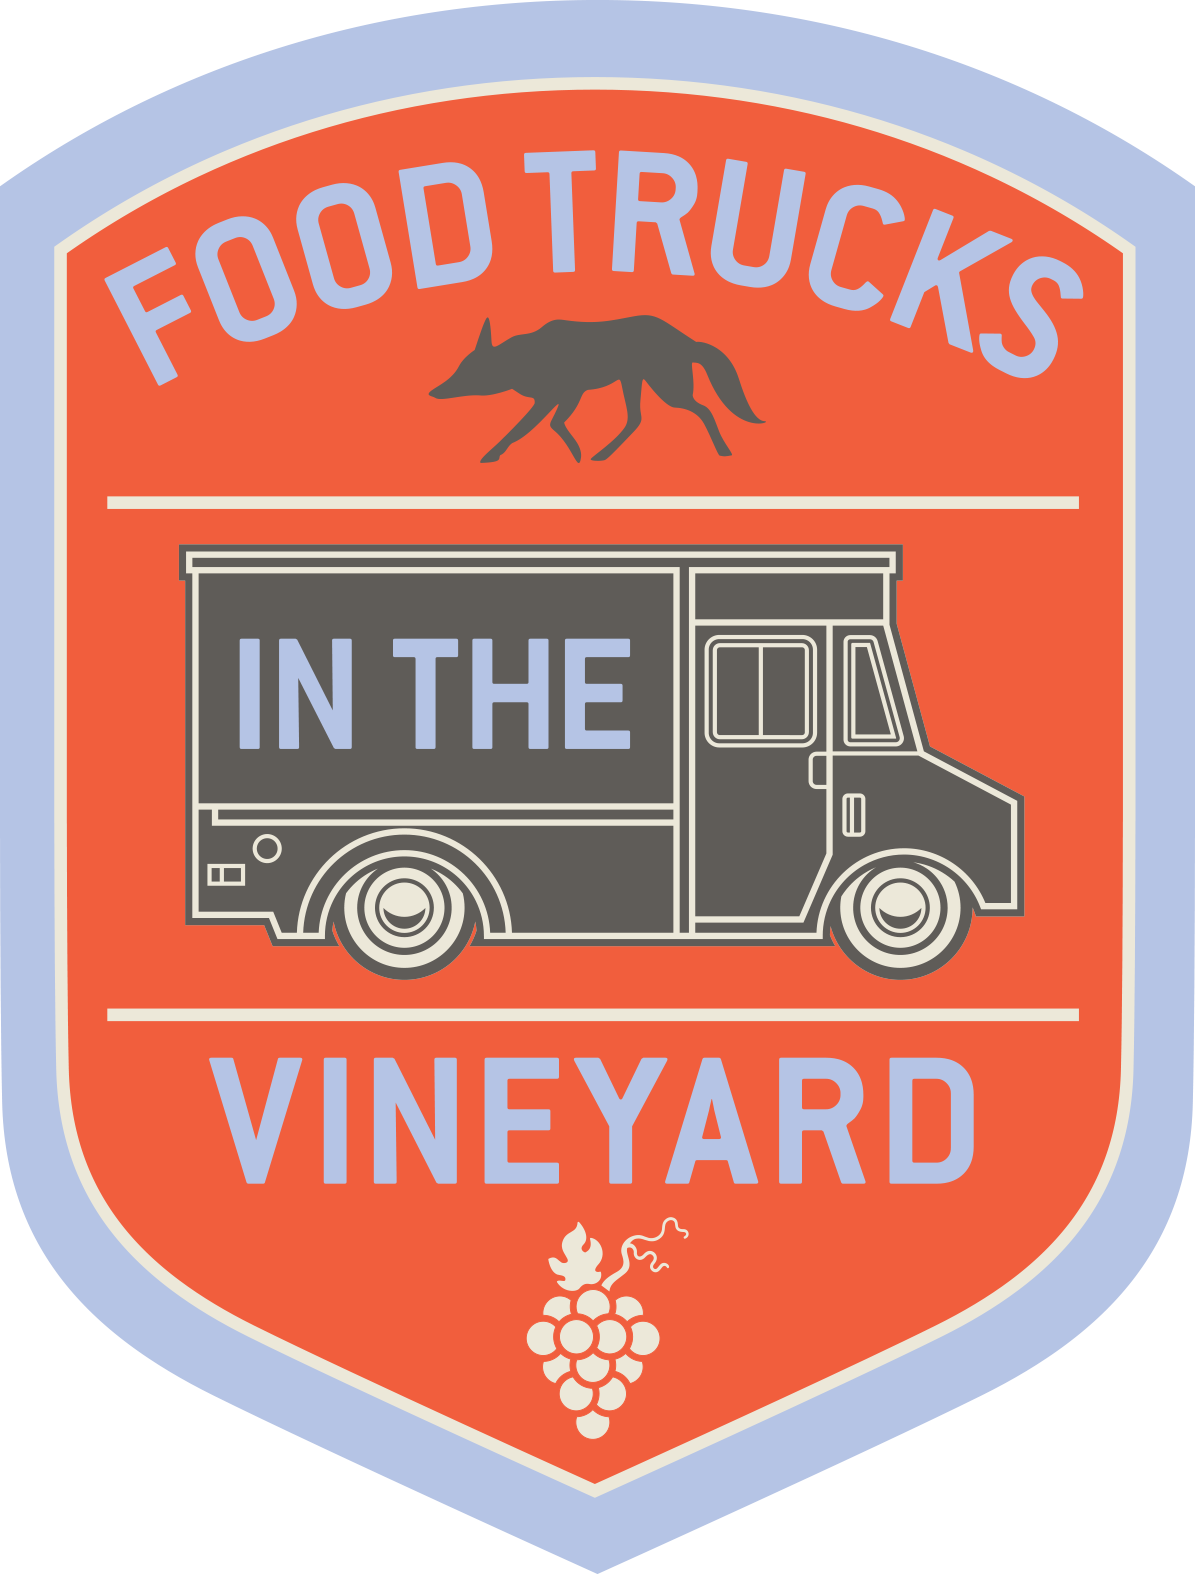 Wine And Food Ruck Eats Will Be Available For Purchase - Food Trucks In The Vineyard: Canadiana A-go-go (1195x1574)